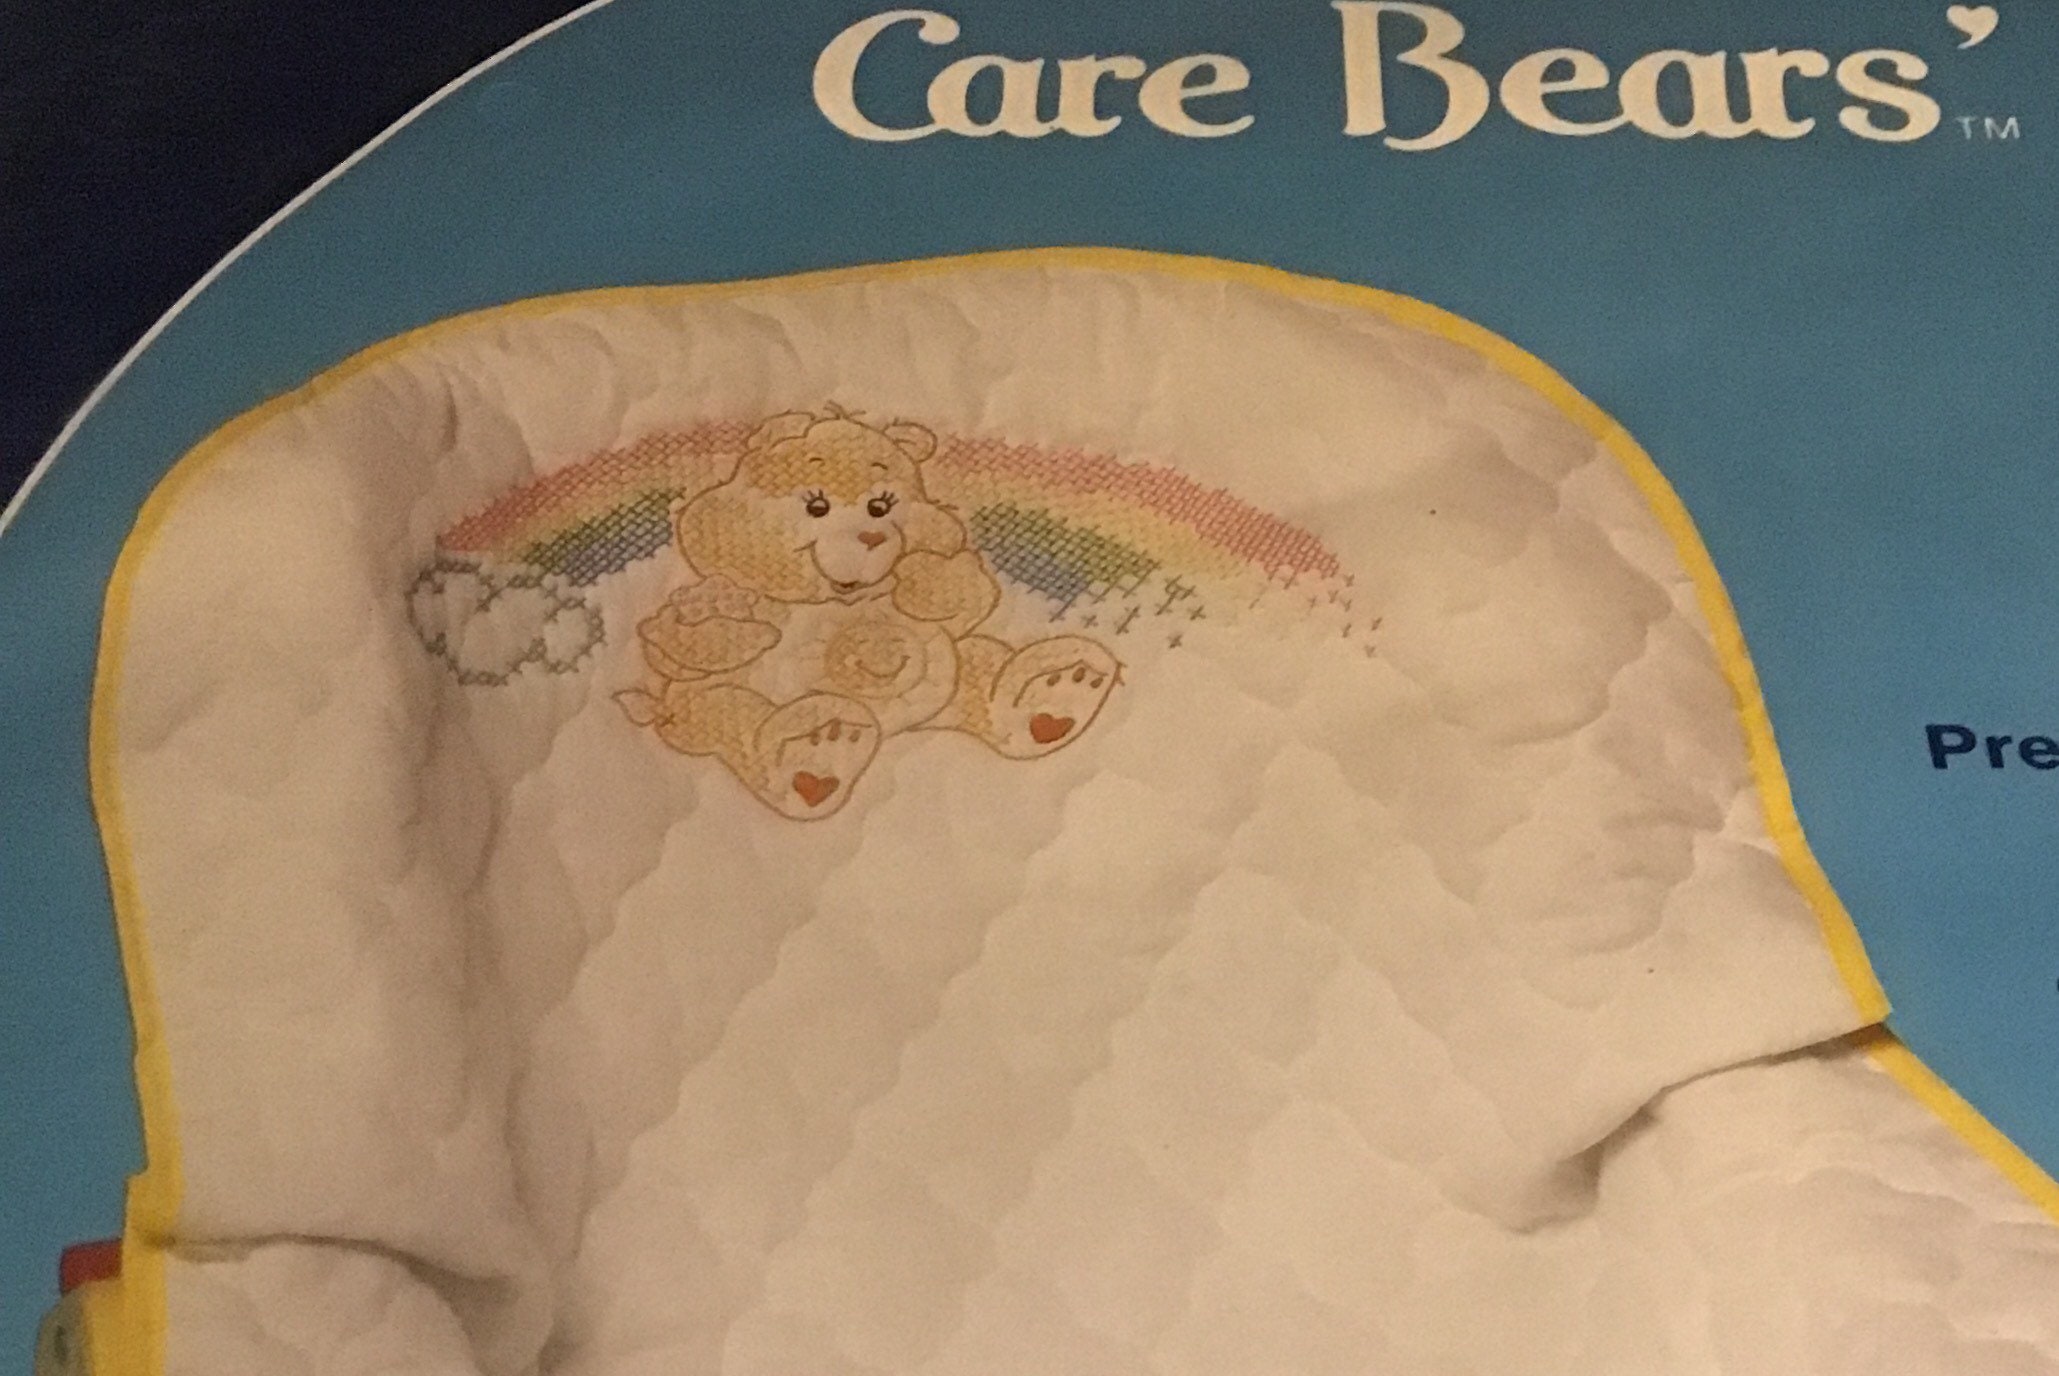 Sweet Baby Rocking in a Bassinet With Teddy Bear & Duck/ Cross Stitch Quilt  Kit by Bucilla/ 34x43/ Kit 47726/ New Sealed Package 